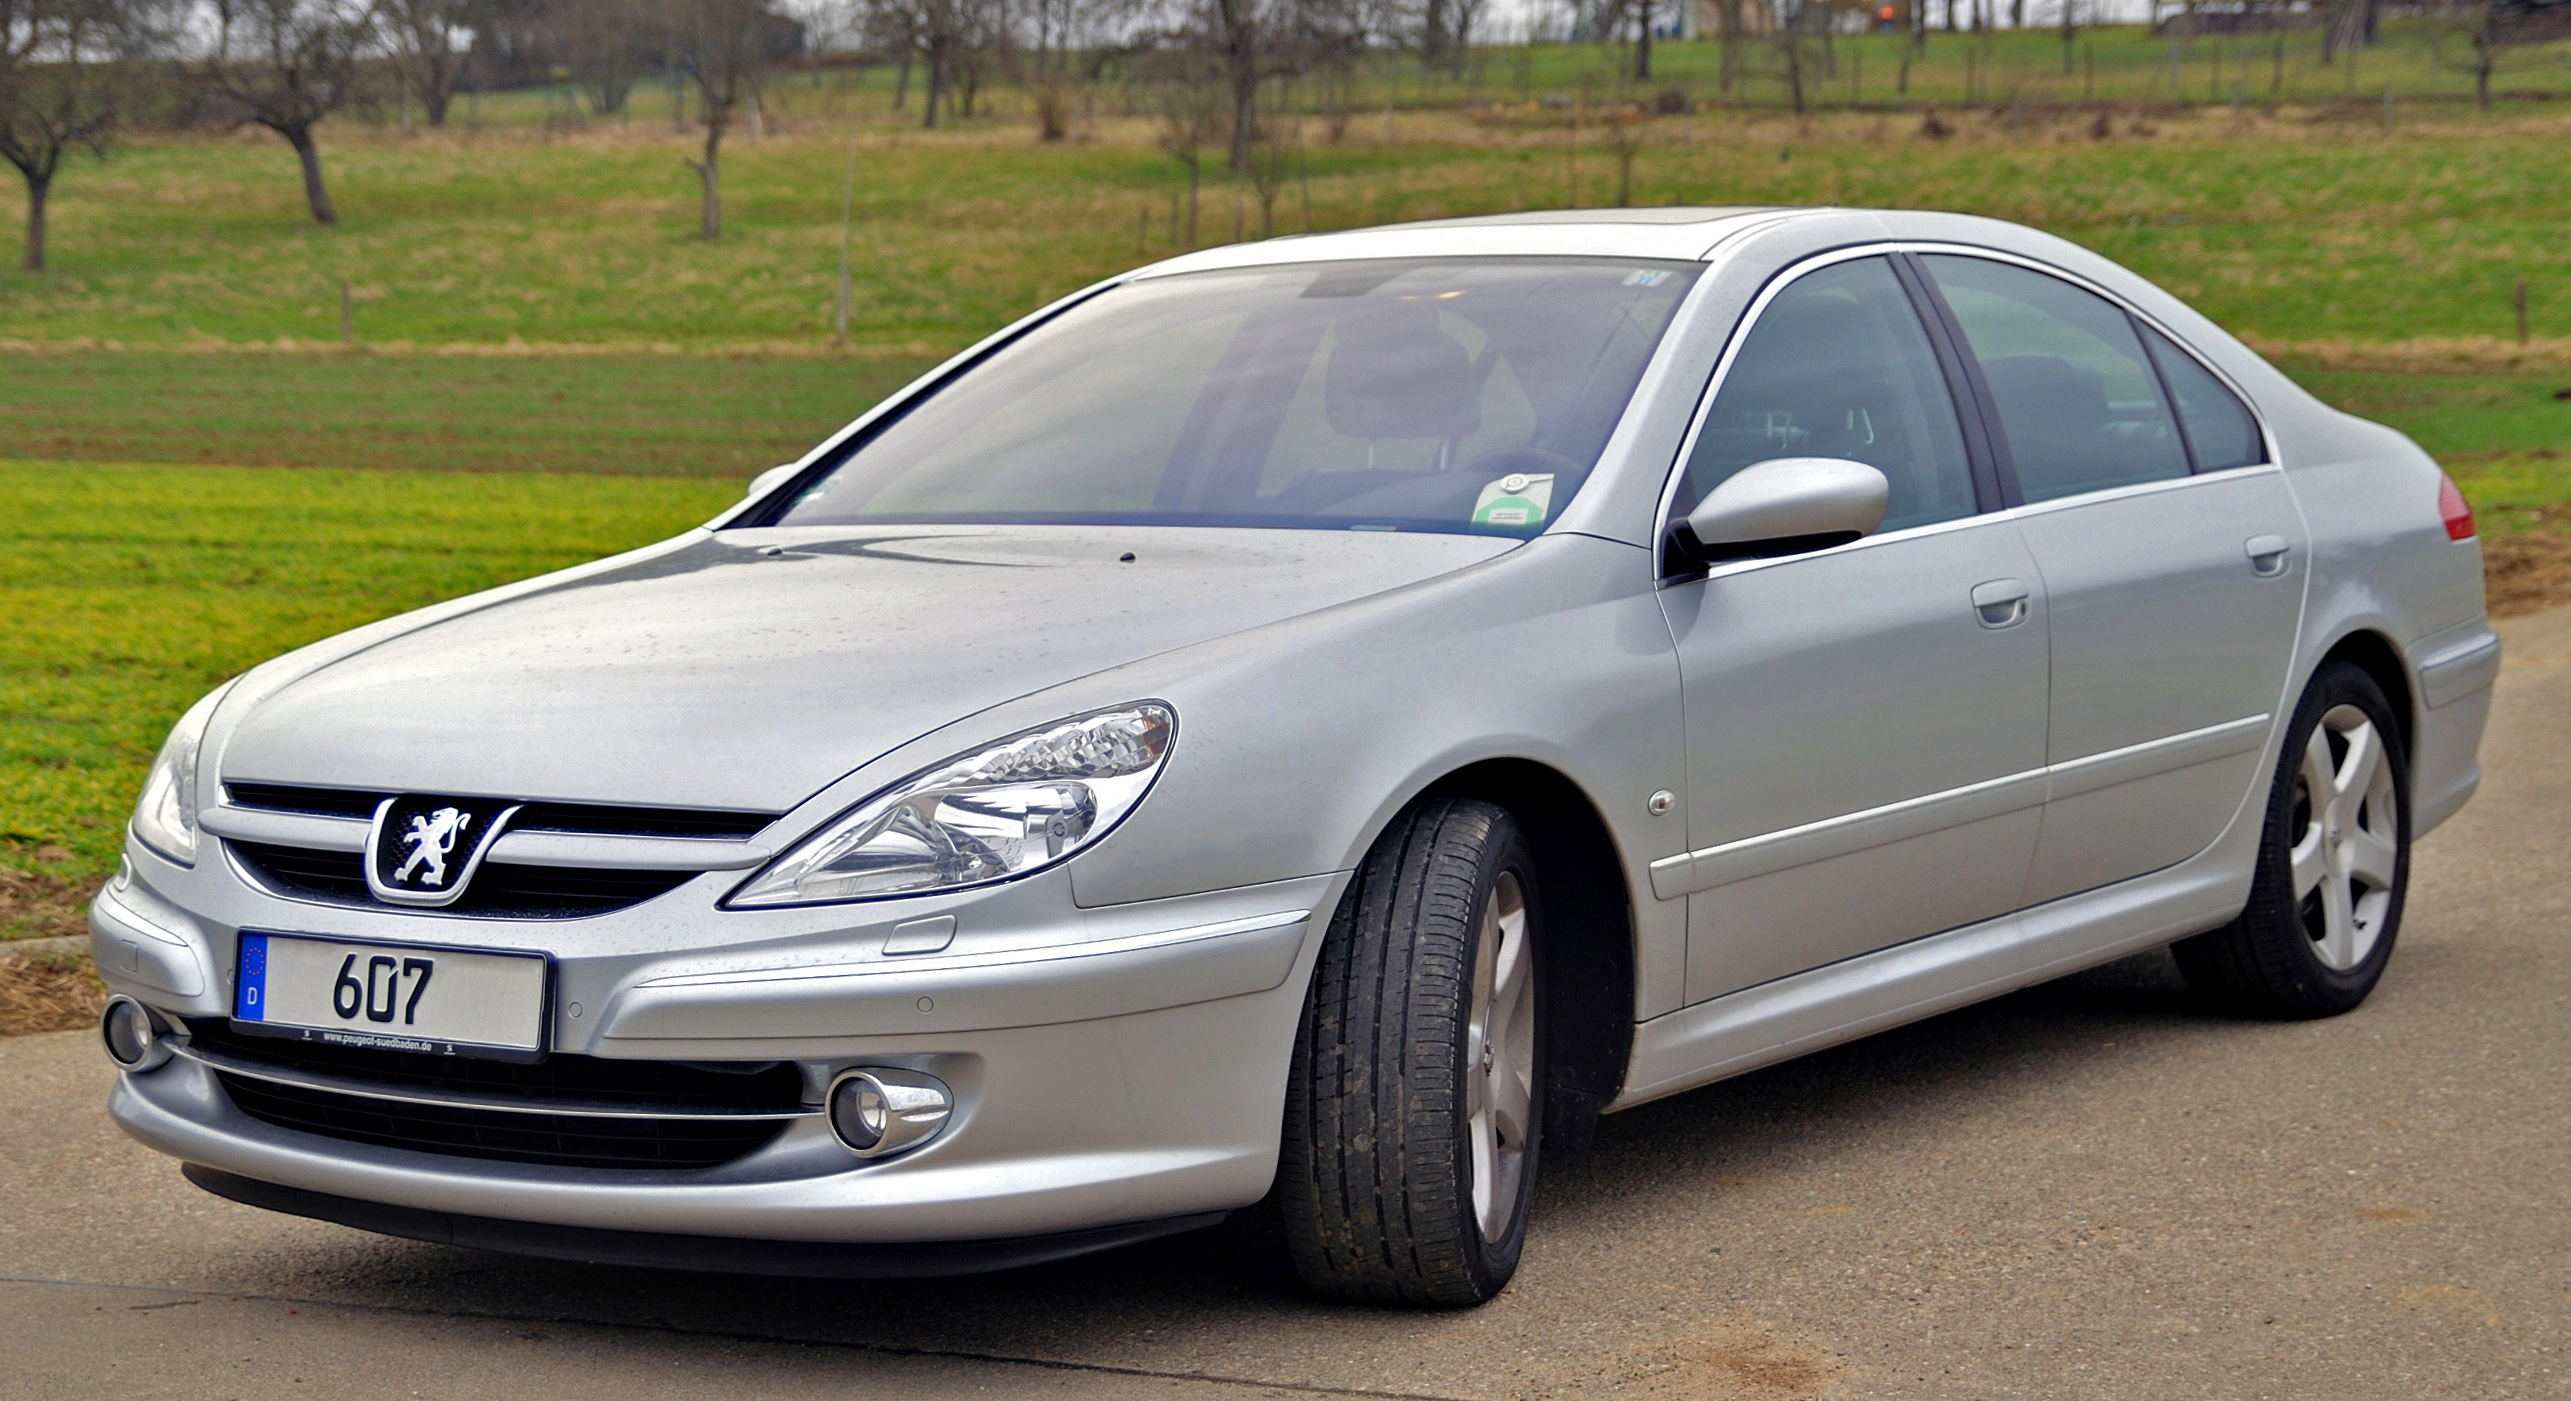 peugeot-607-technical-specifications-and-fuel-economy